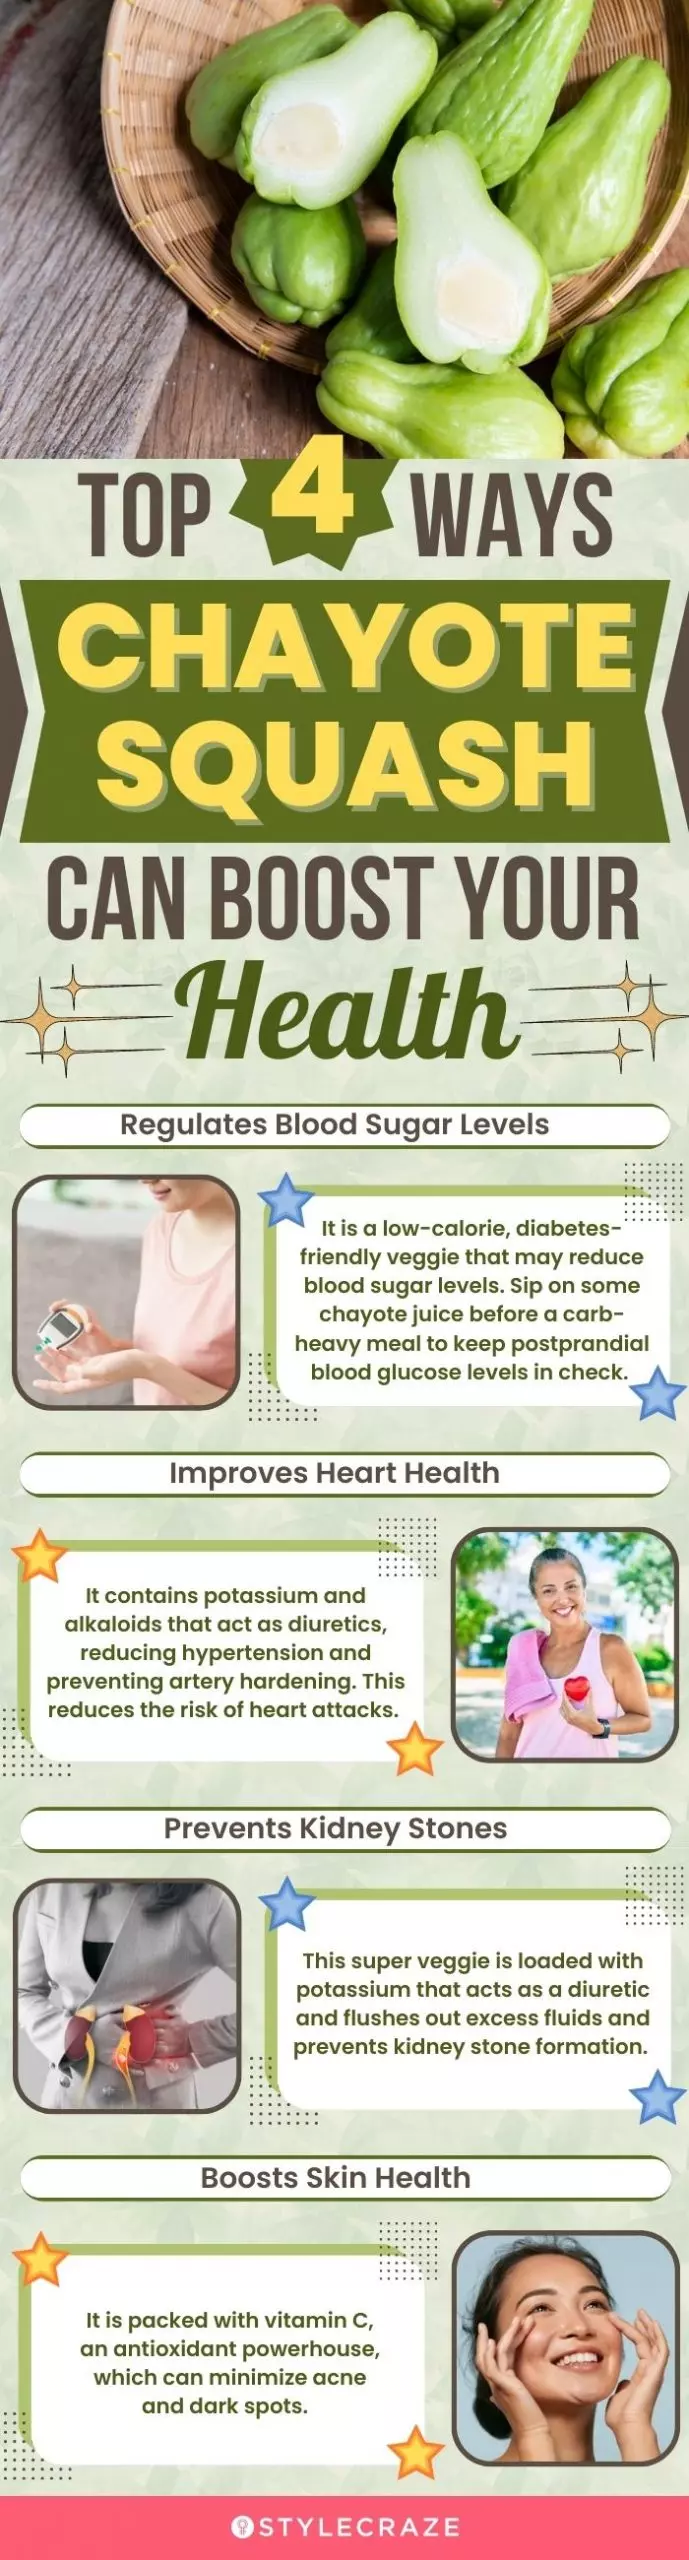 top 4 ways chayote squash can boost your health (infographic)